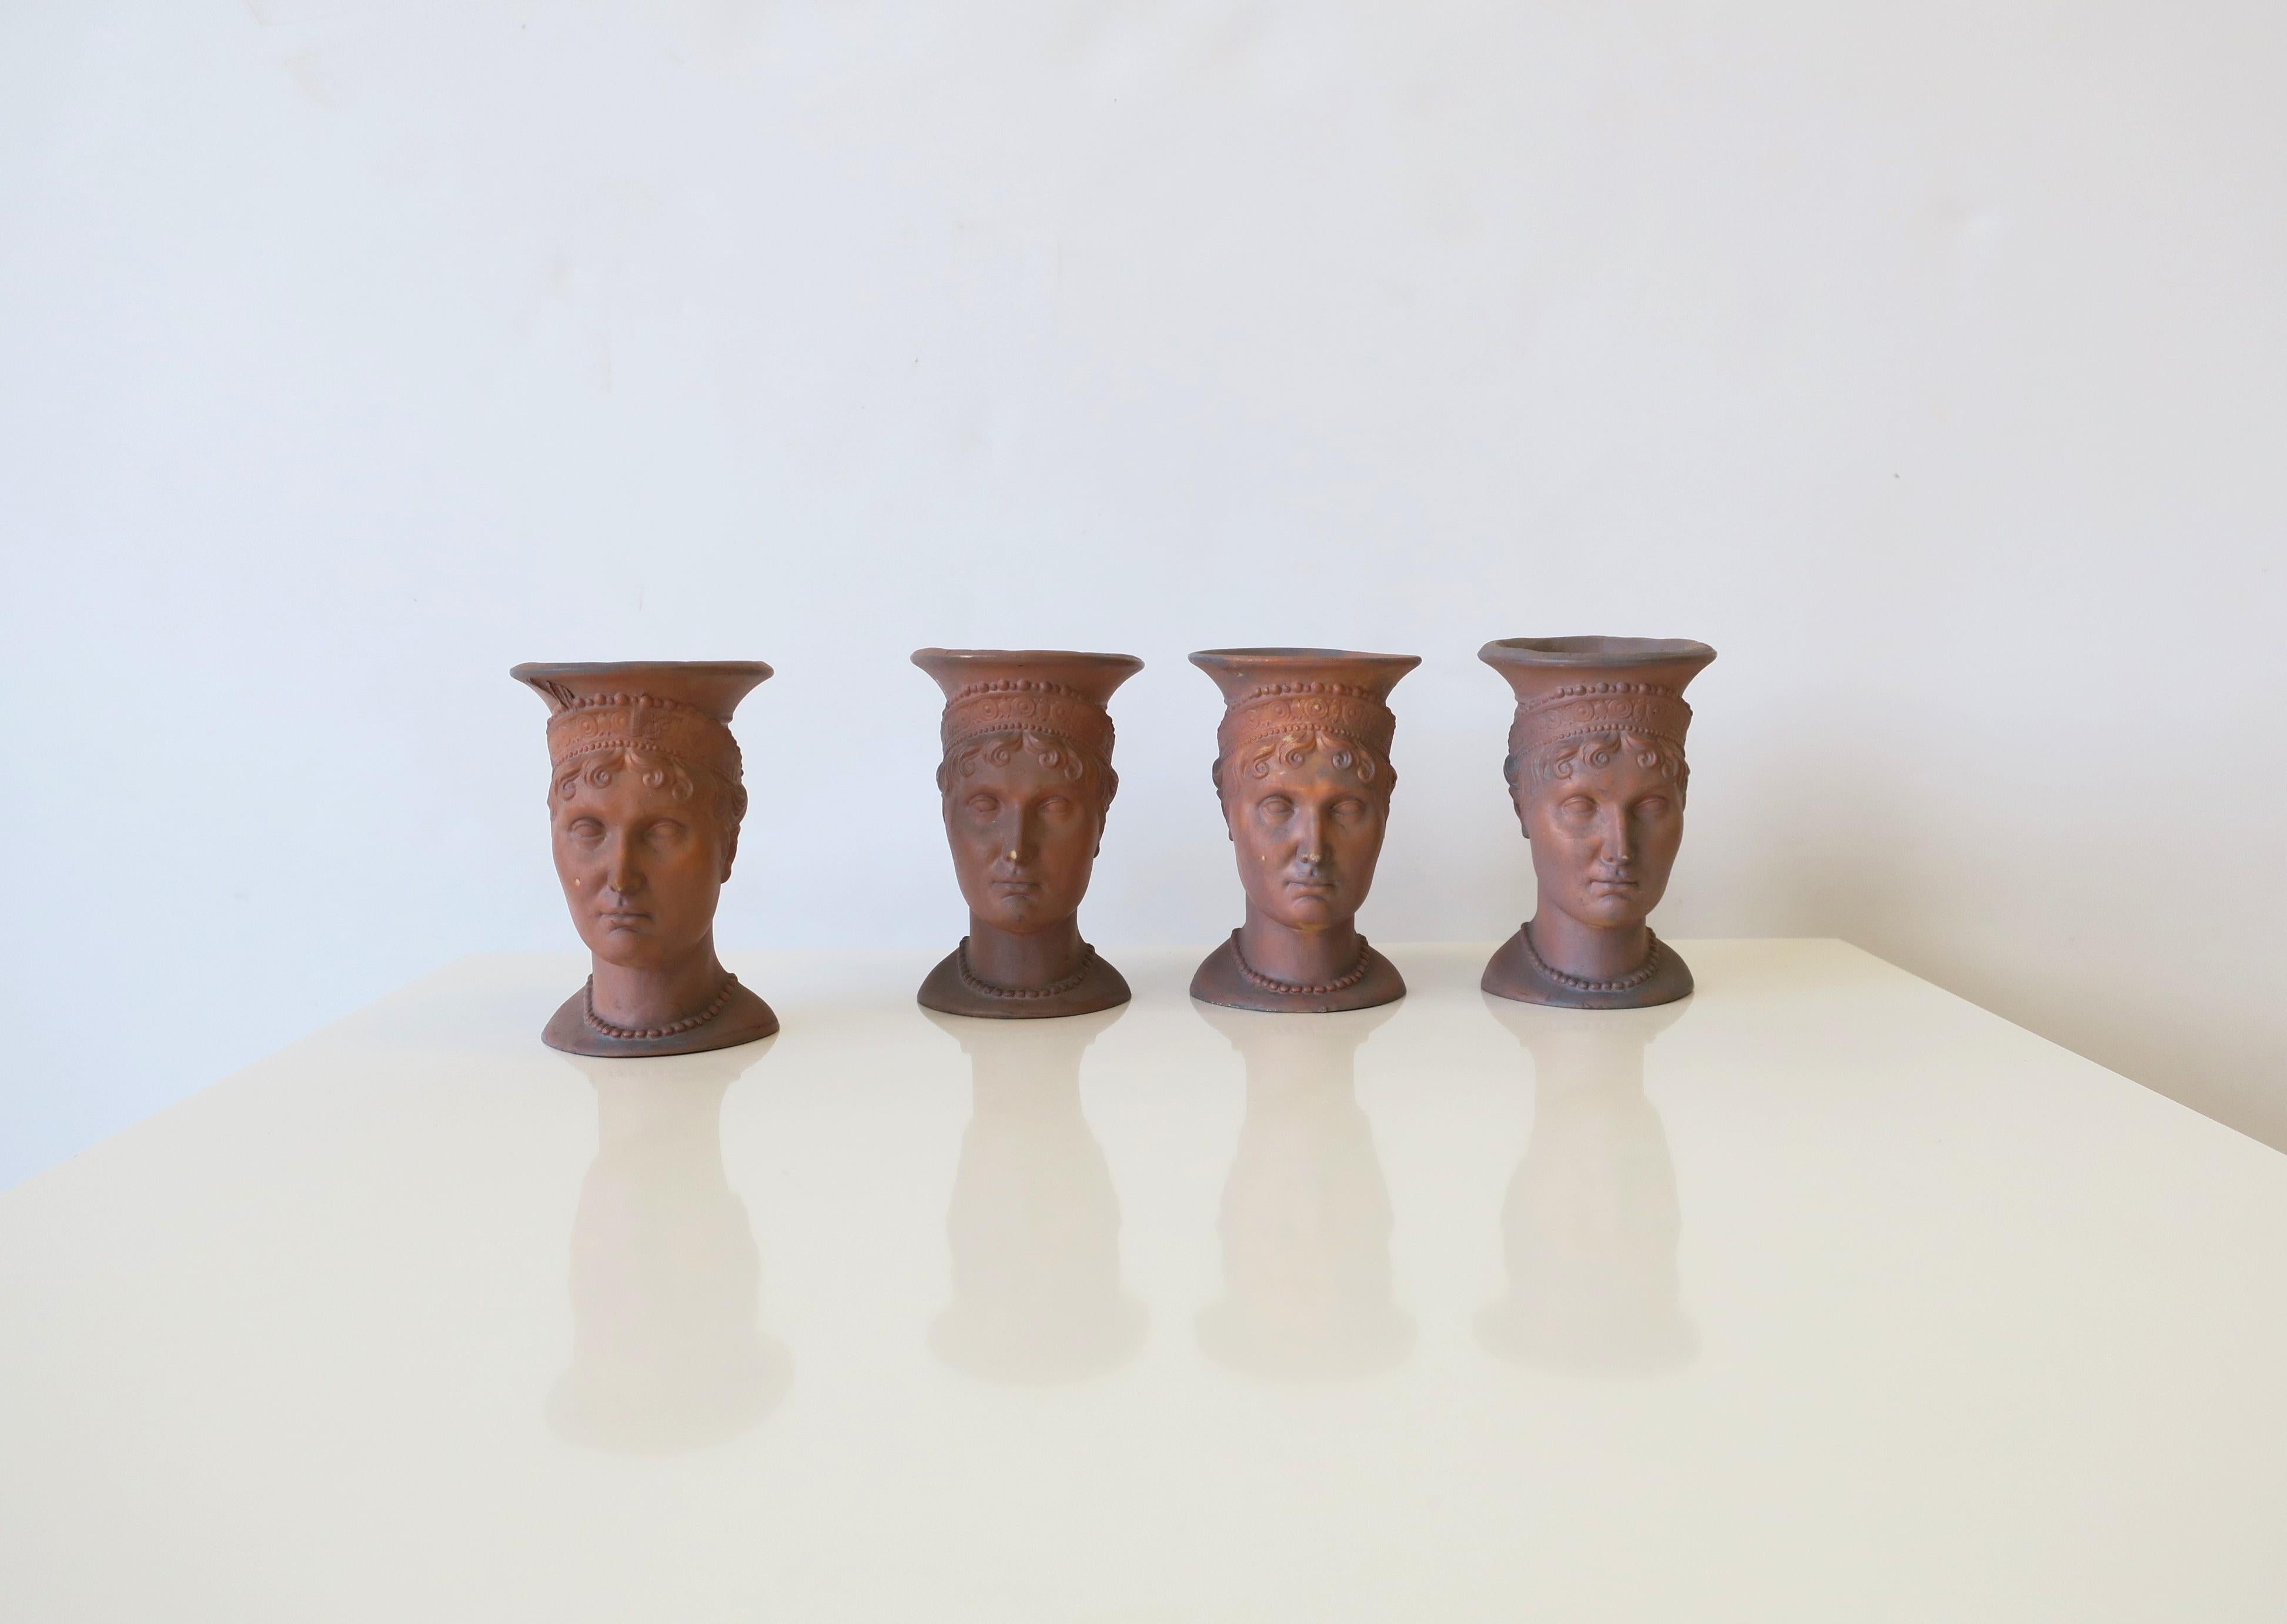 A beautiful set of four (4) terracotta head bust sculptures. Four female head sculpture carvings glazed in terracotta. Beautiful decorative objects as demonstrated. A signature appears on the inside edge of one as shown in image #19. 

Dimensions: